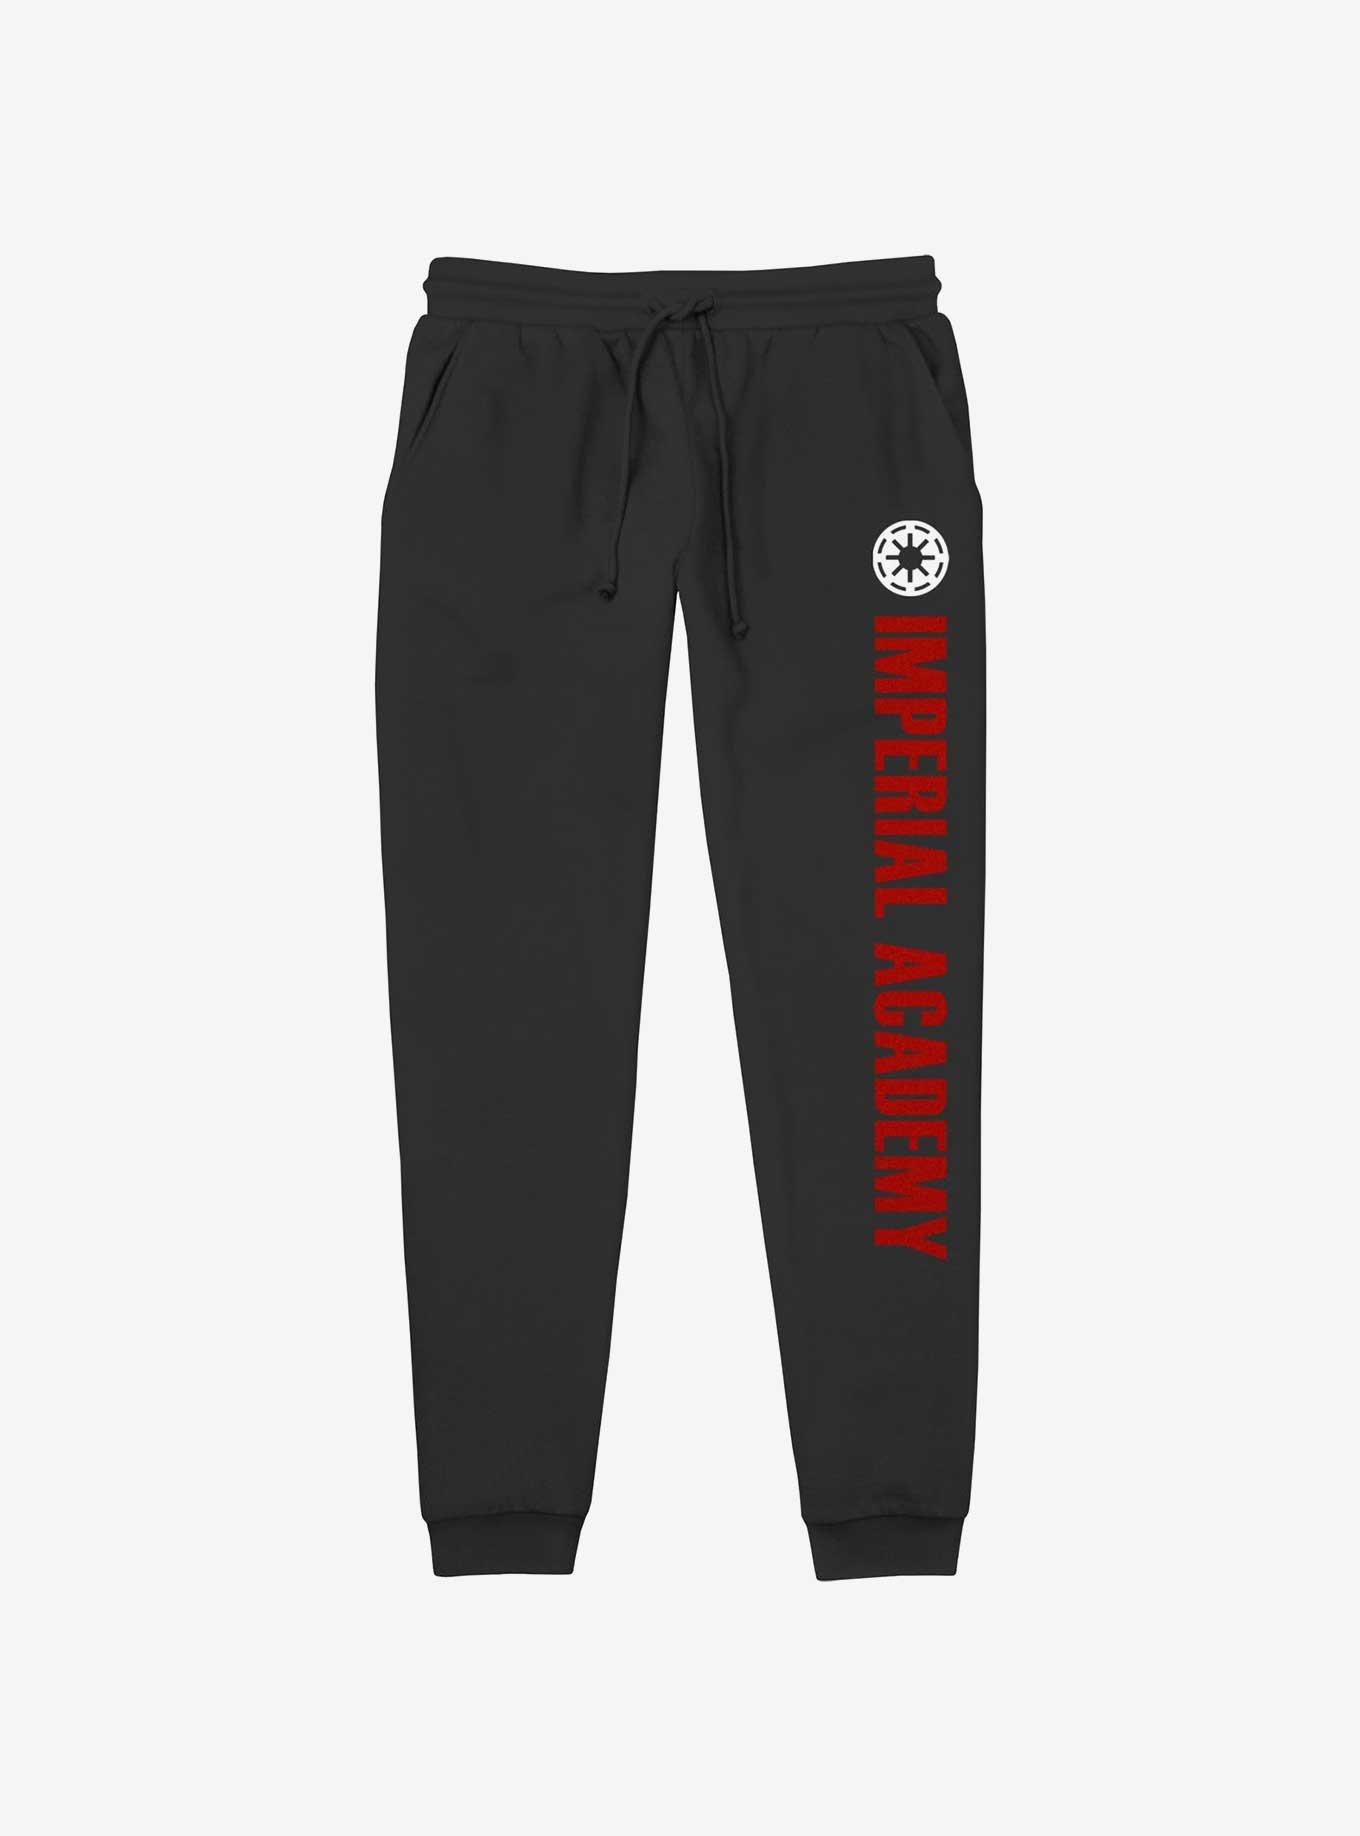 Star Wars Imperial Academy Jogger Sweatpants